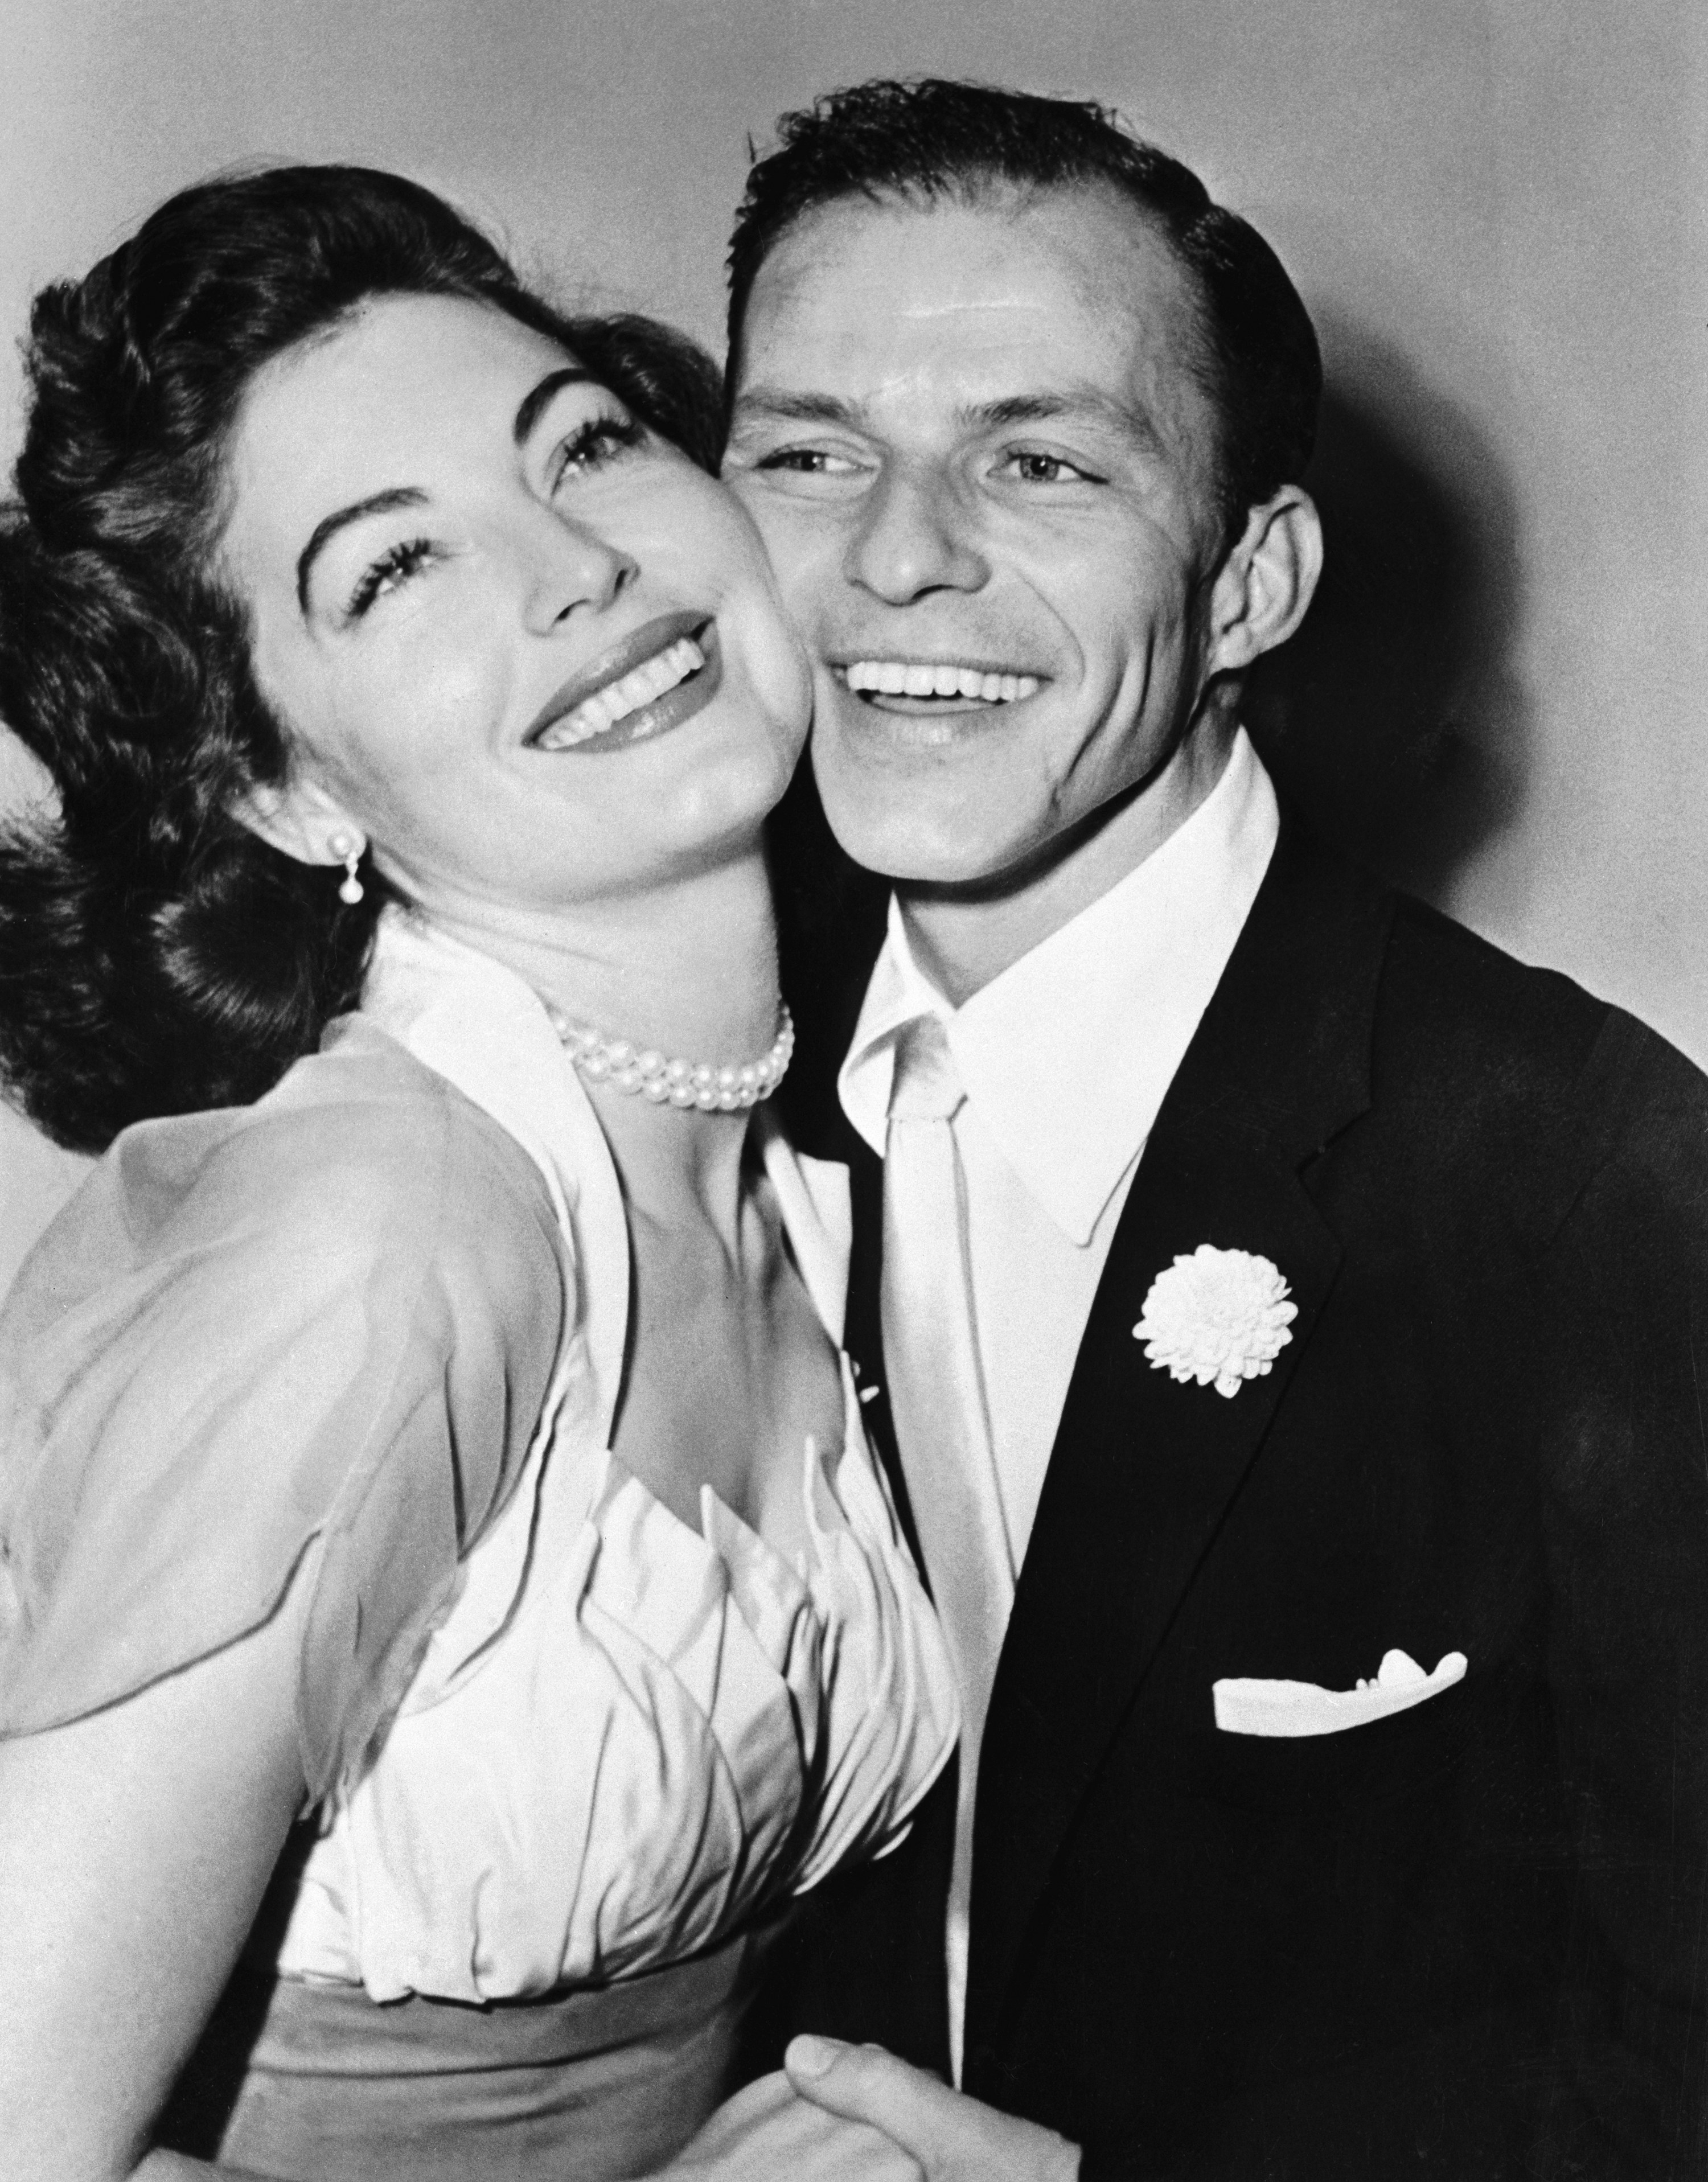 Ava Gardner and Frank Sinatra as newlyweds in 1951